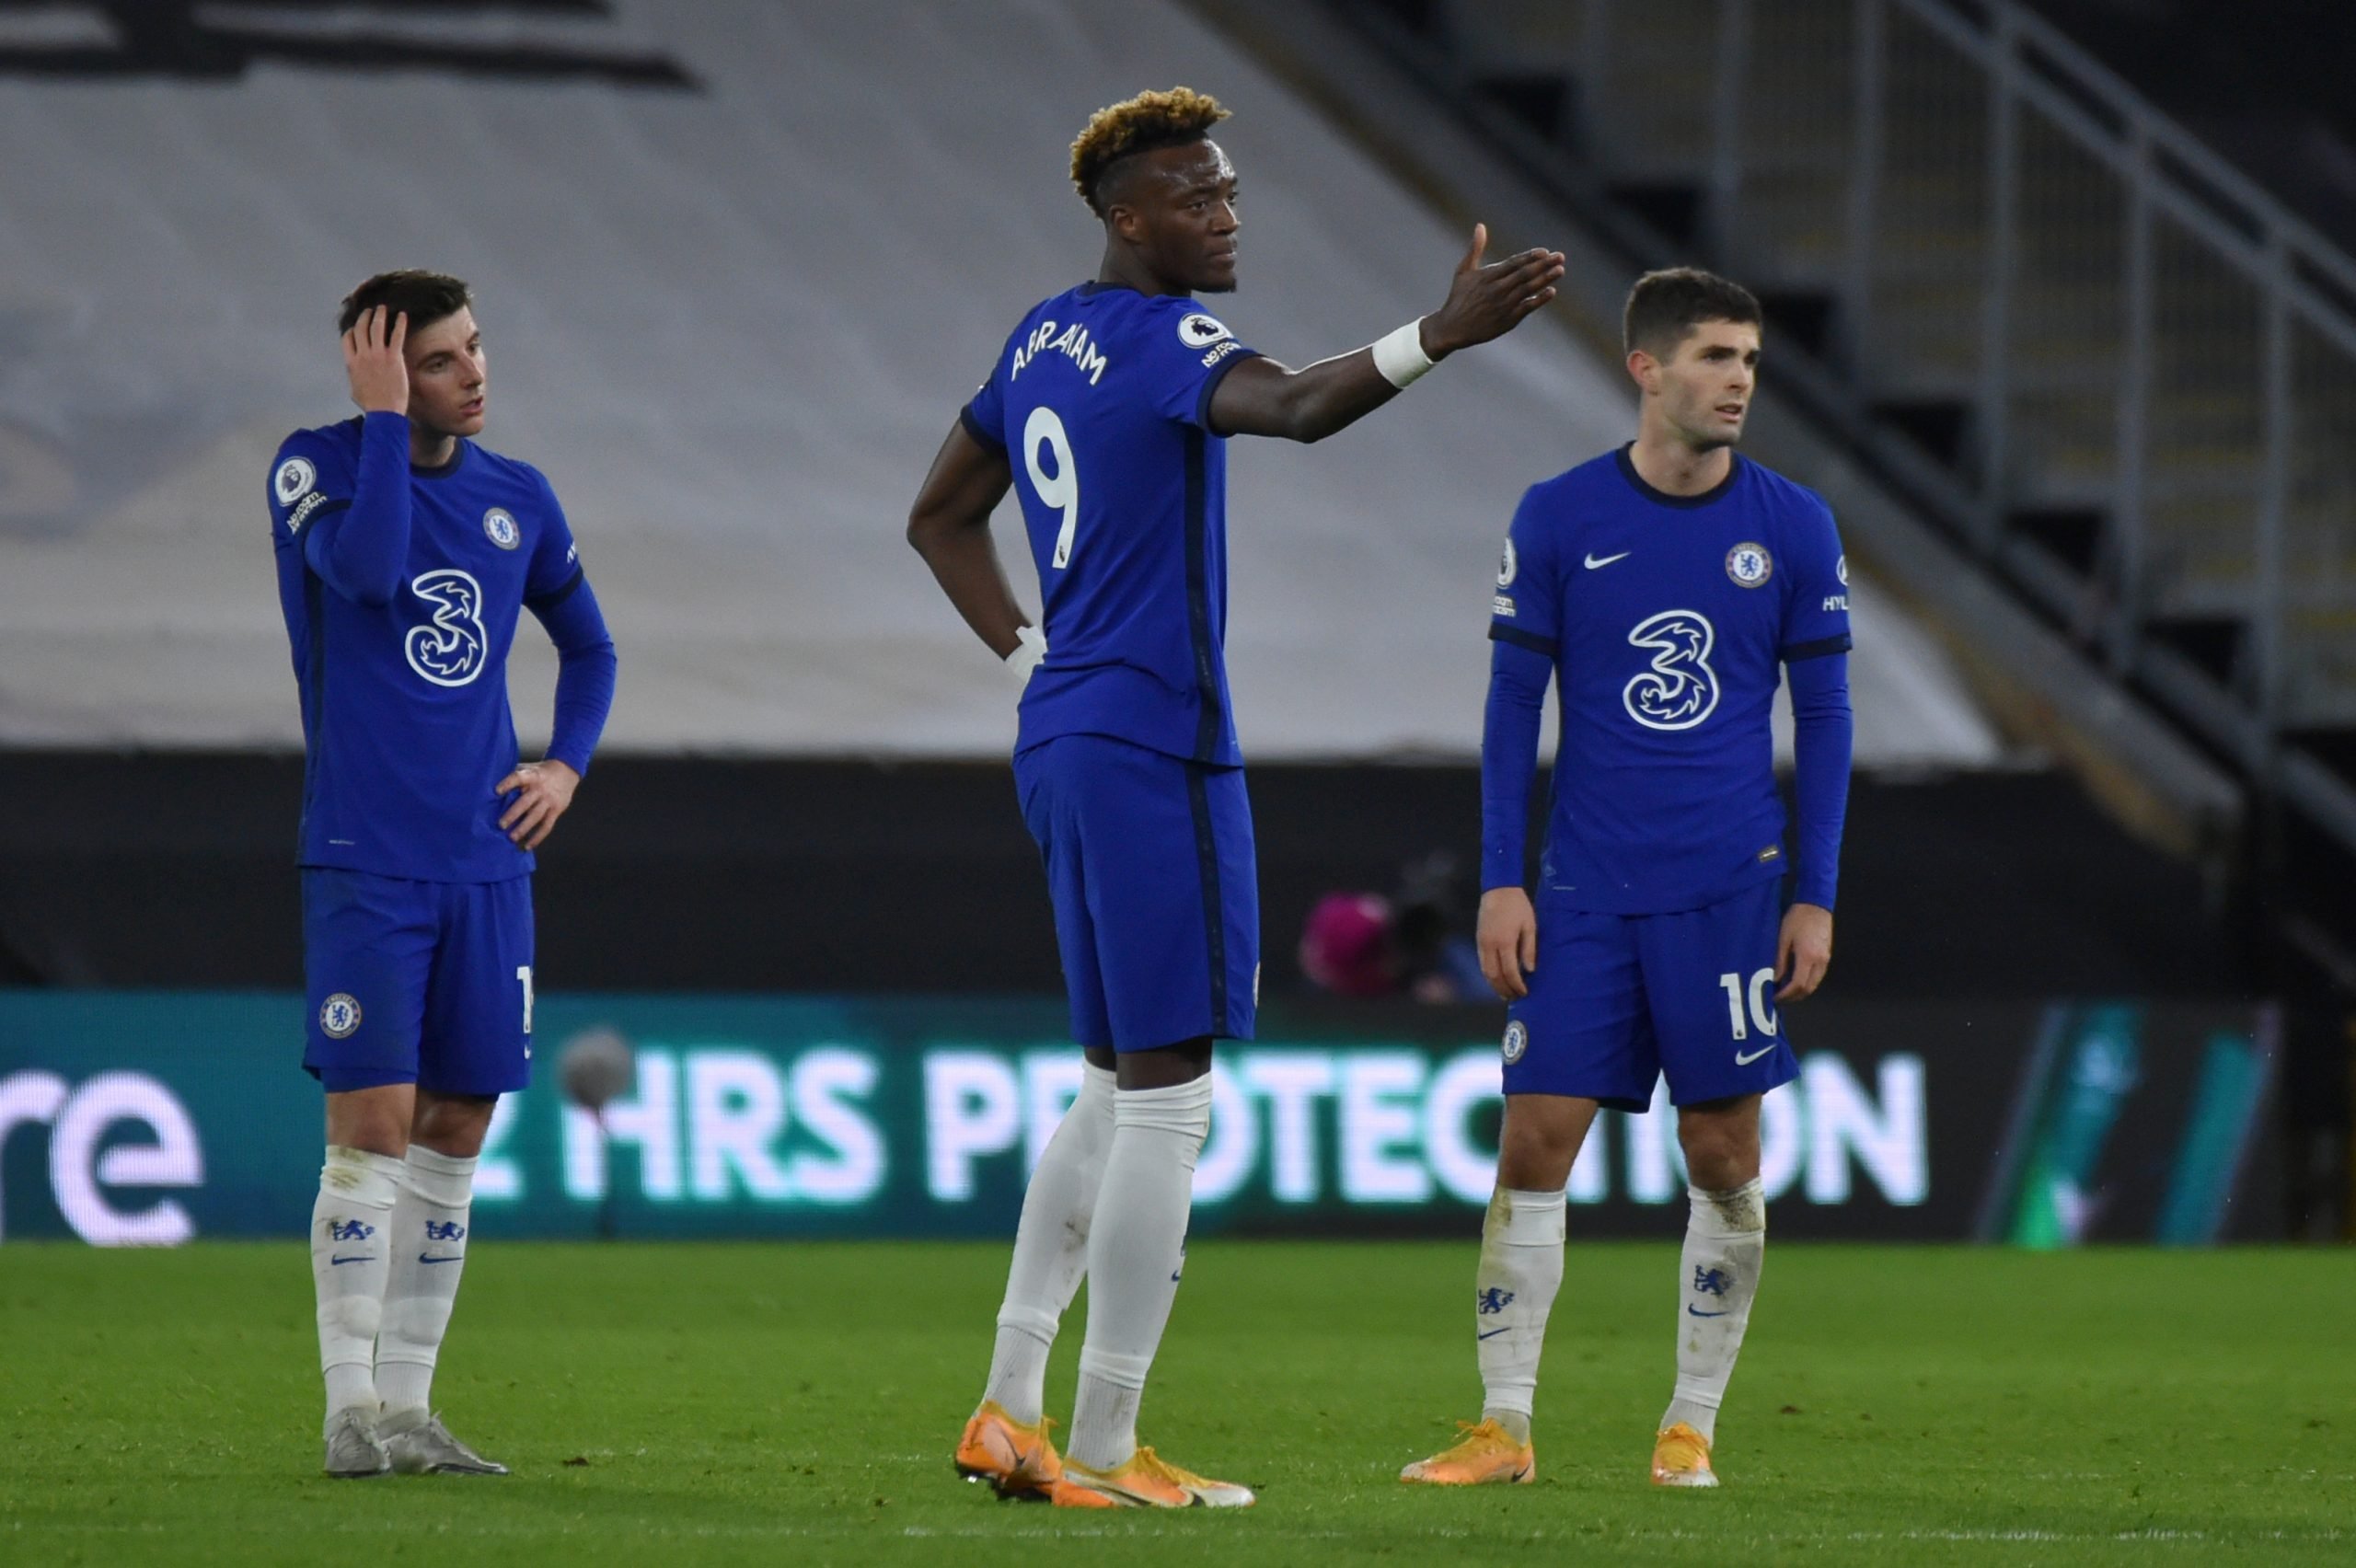 Chelsea players rated in disappointing loss vs Leicester City (Chelsea players are seen in the picture)